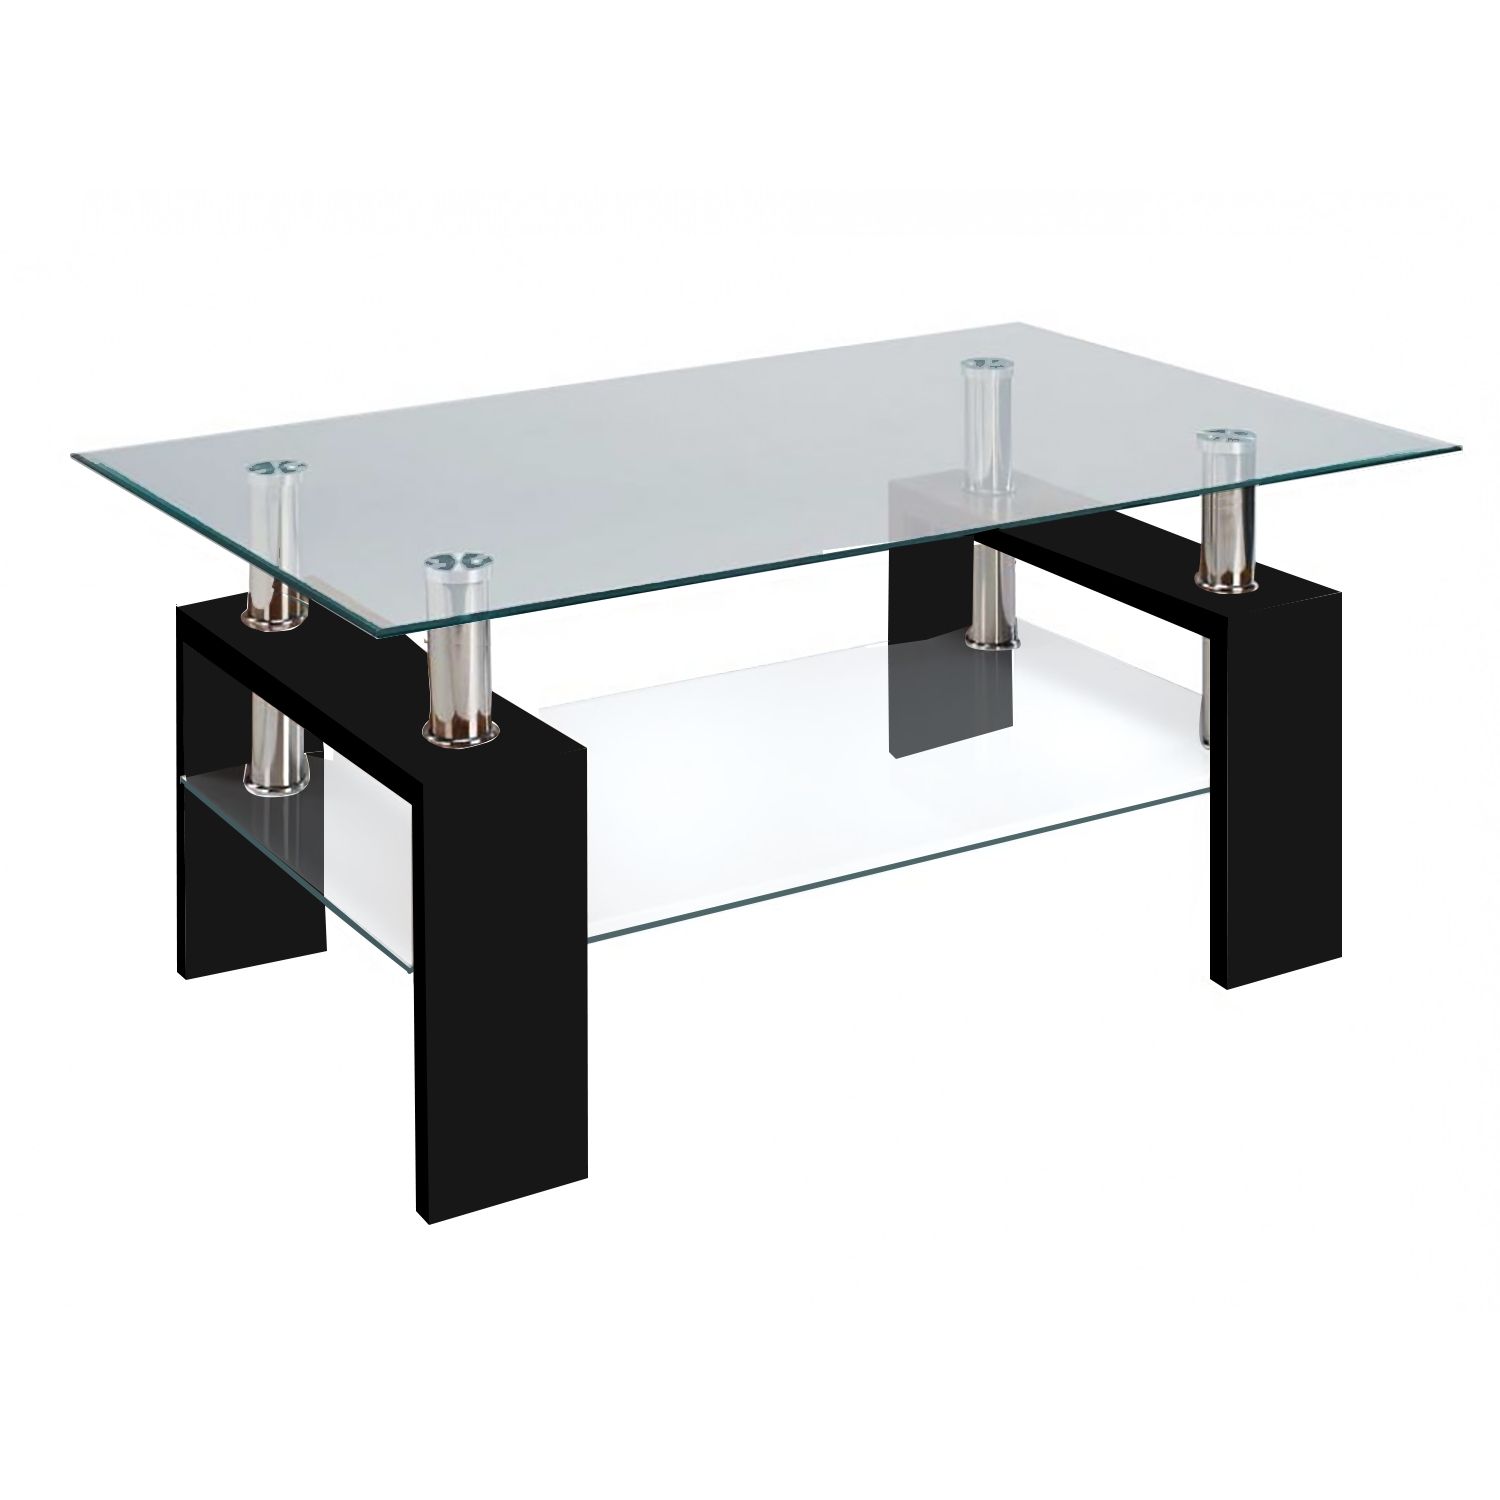 Modern Glass Black Coffee Table With Shelf Contemporary Inside Current Small Coffee Tables With Shelf (View 14 of 20)